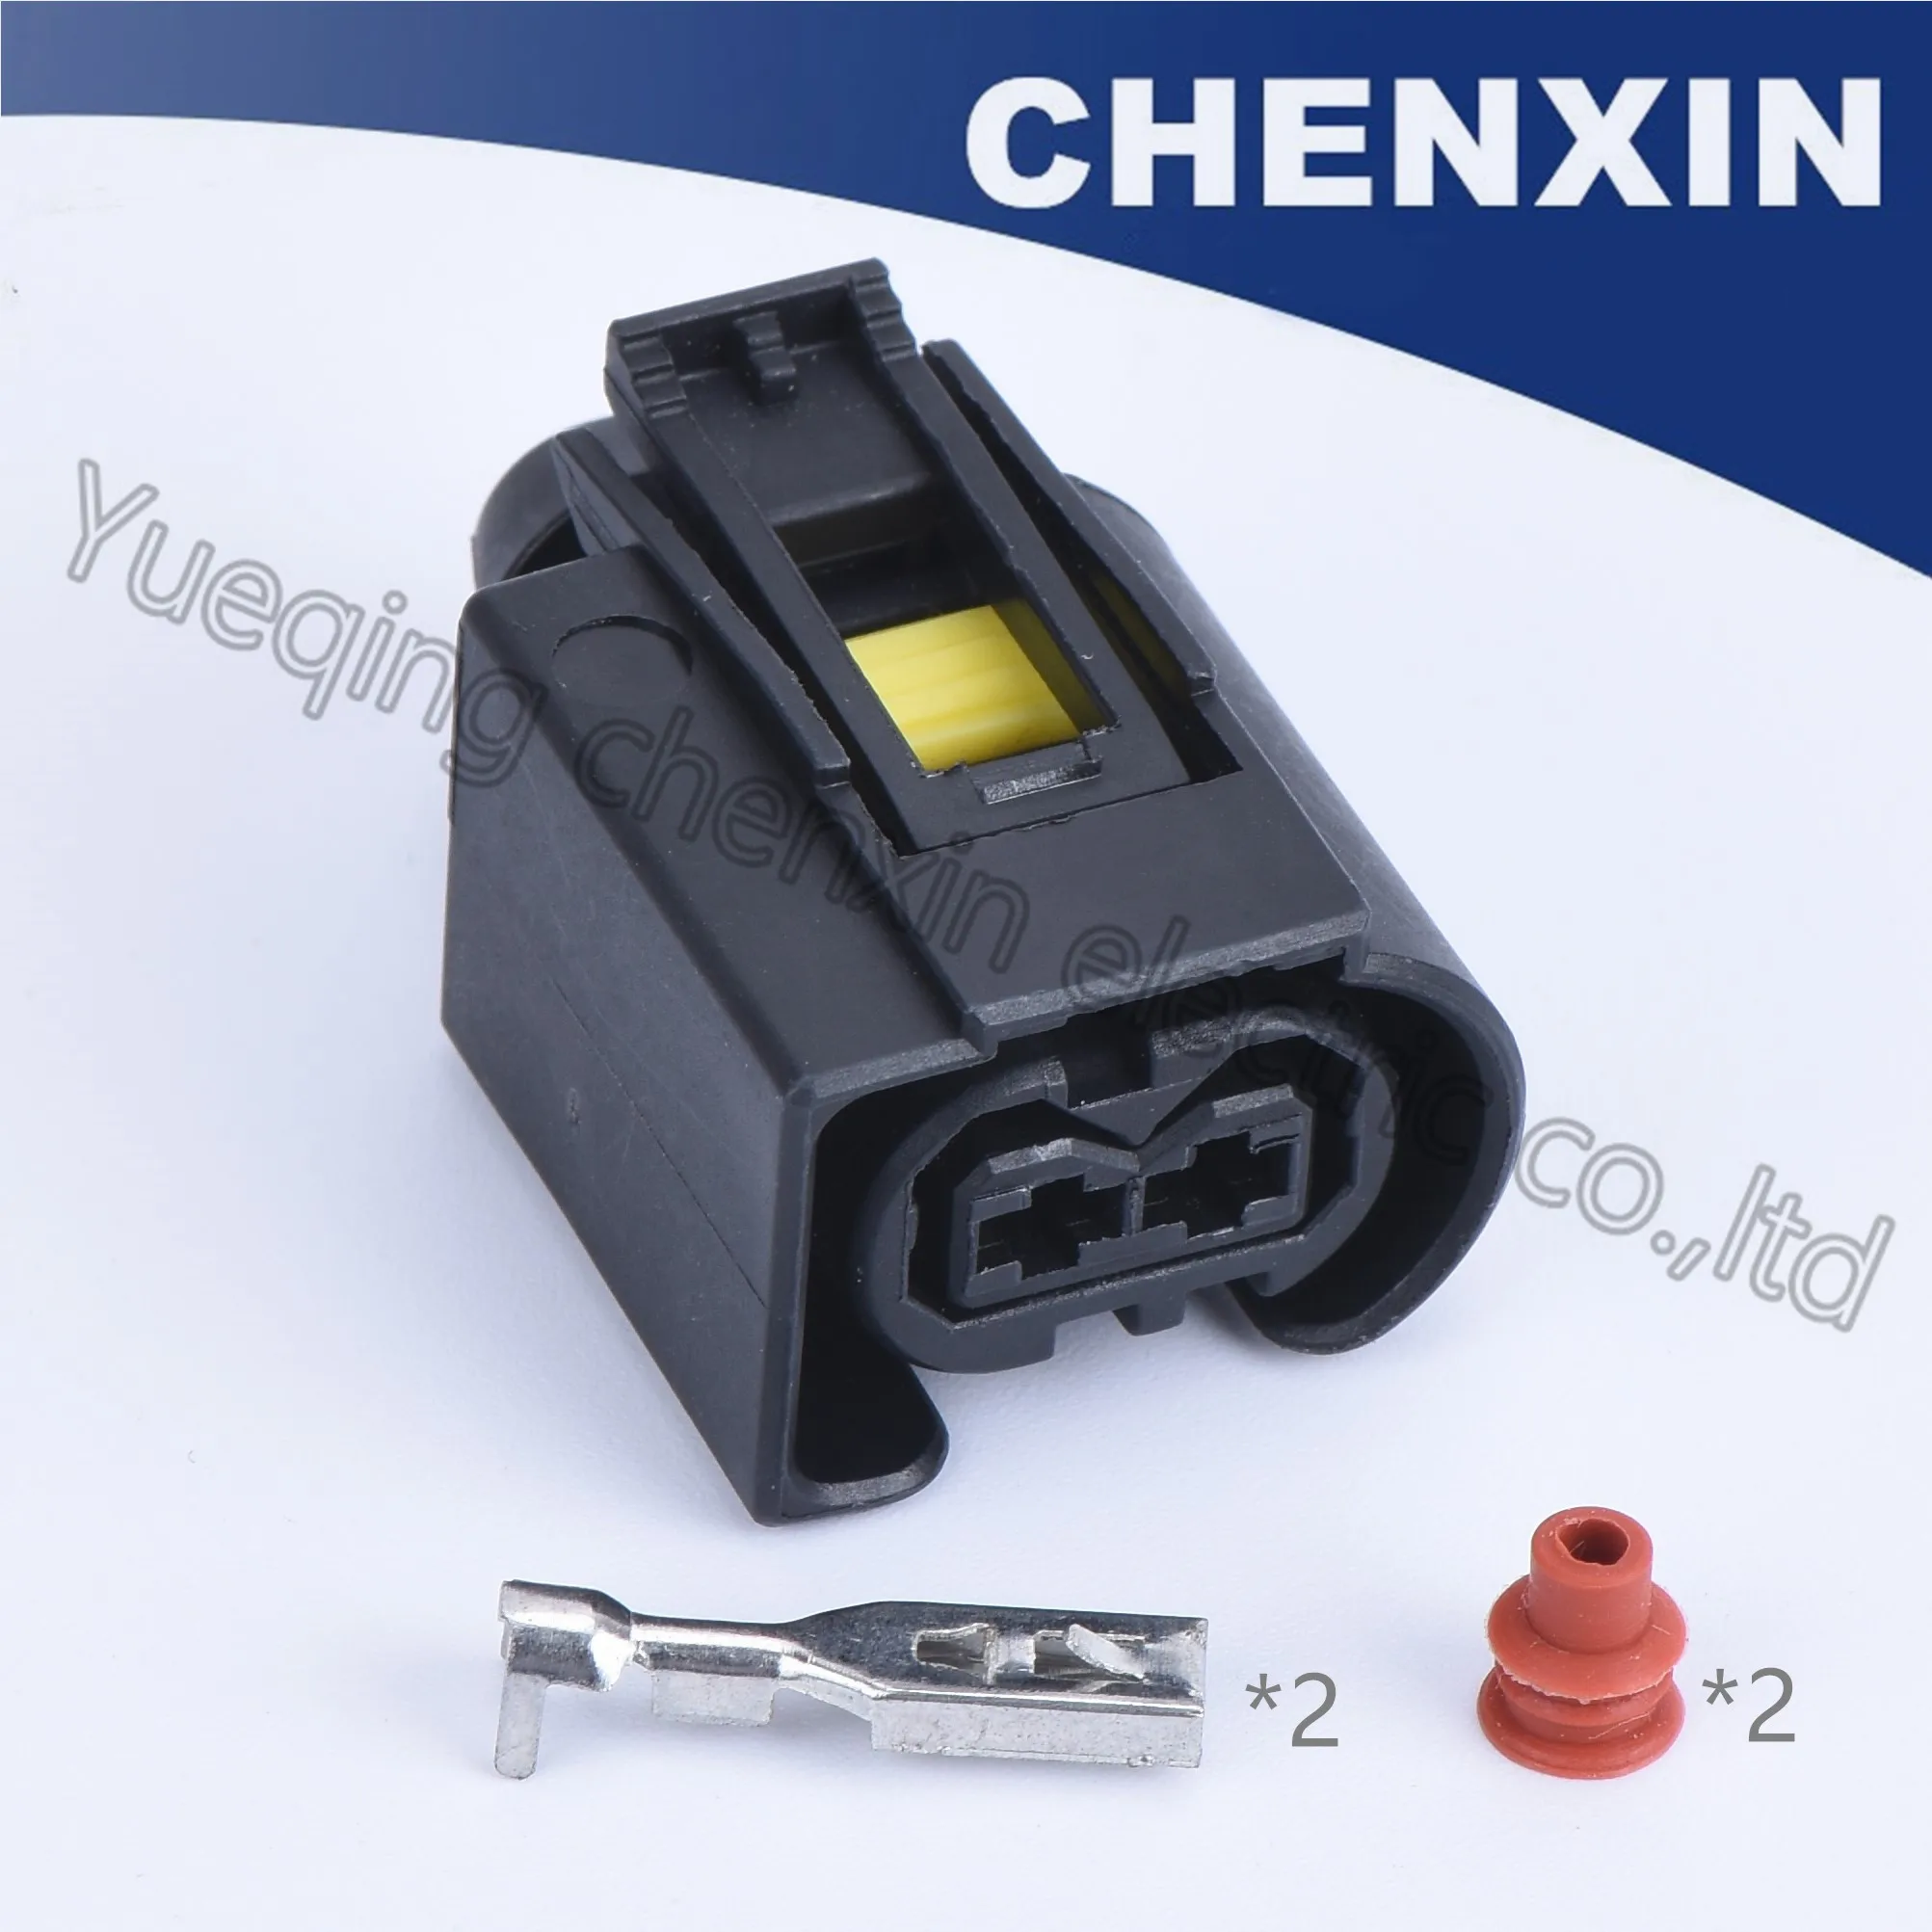 

Black 2pin Ignition coil harness damper plug Waterproof Auto connector 50290937 Automotive Sealed Female(2.8) Connector Housing